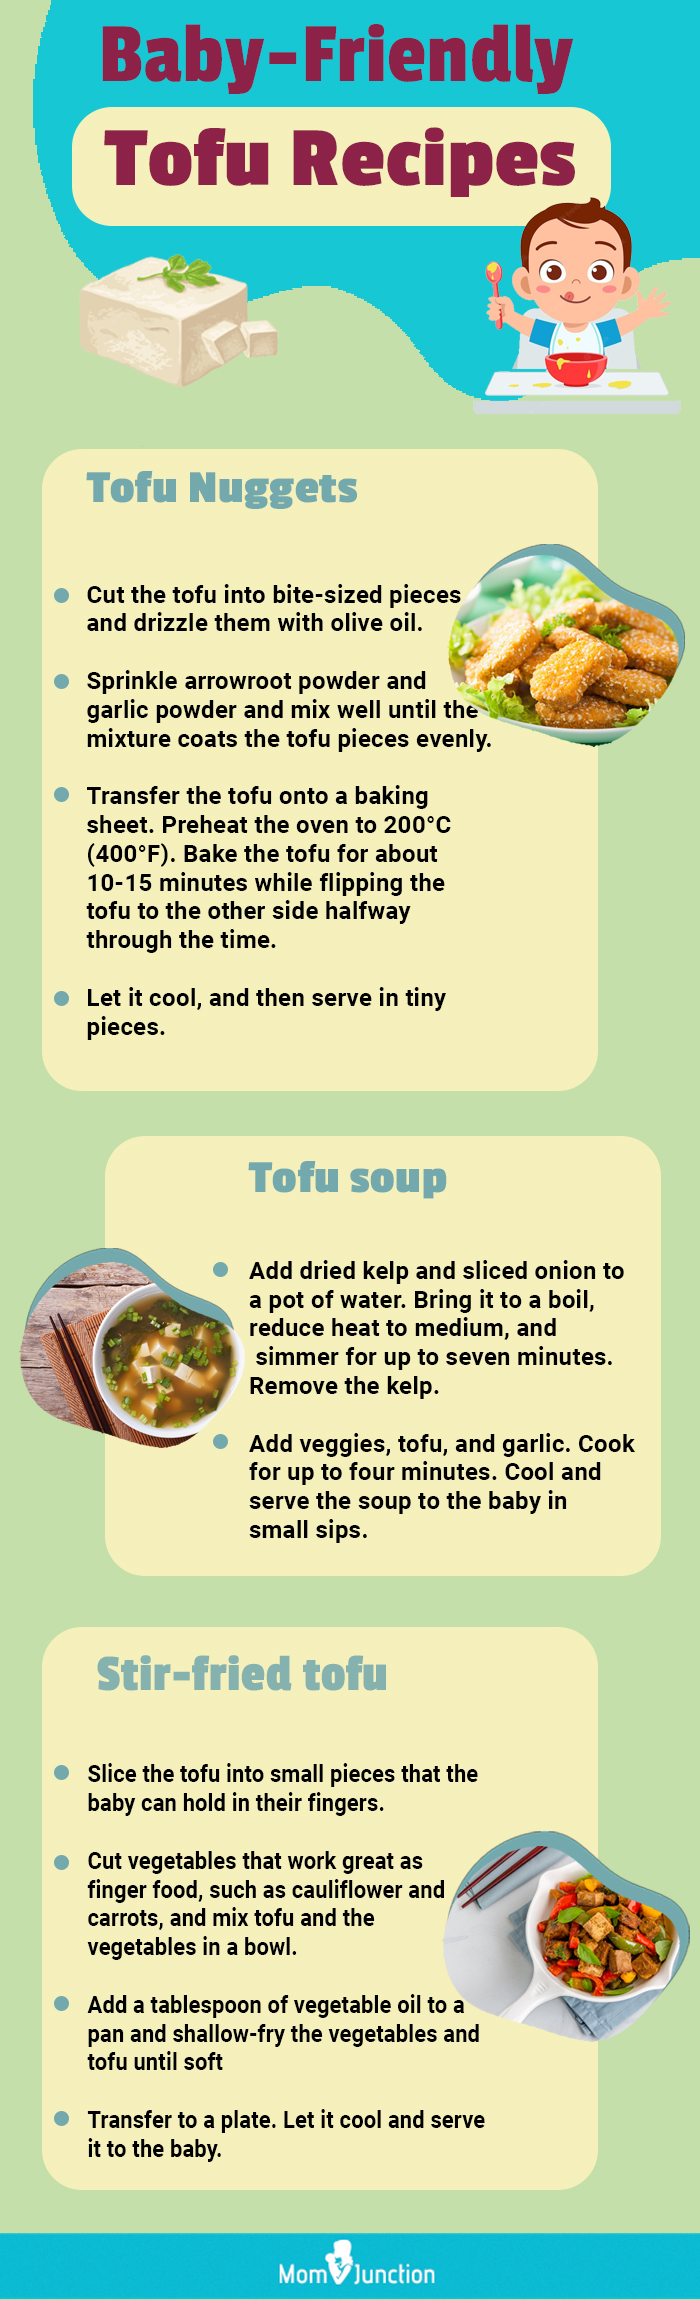 tofu recipes for babies (infographic)